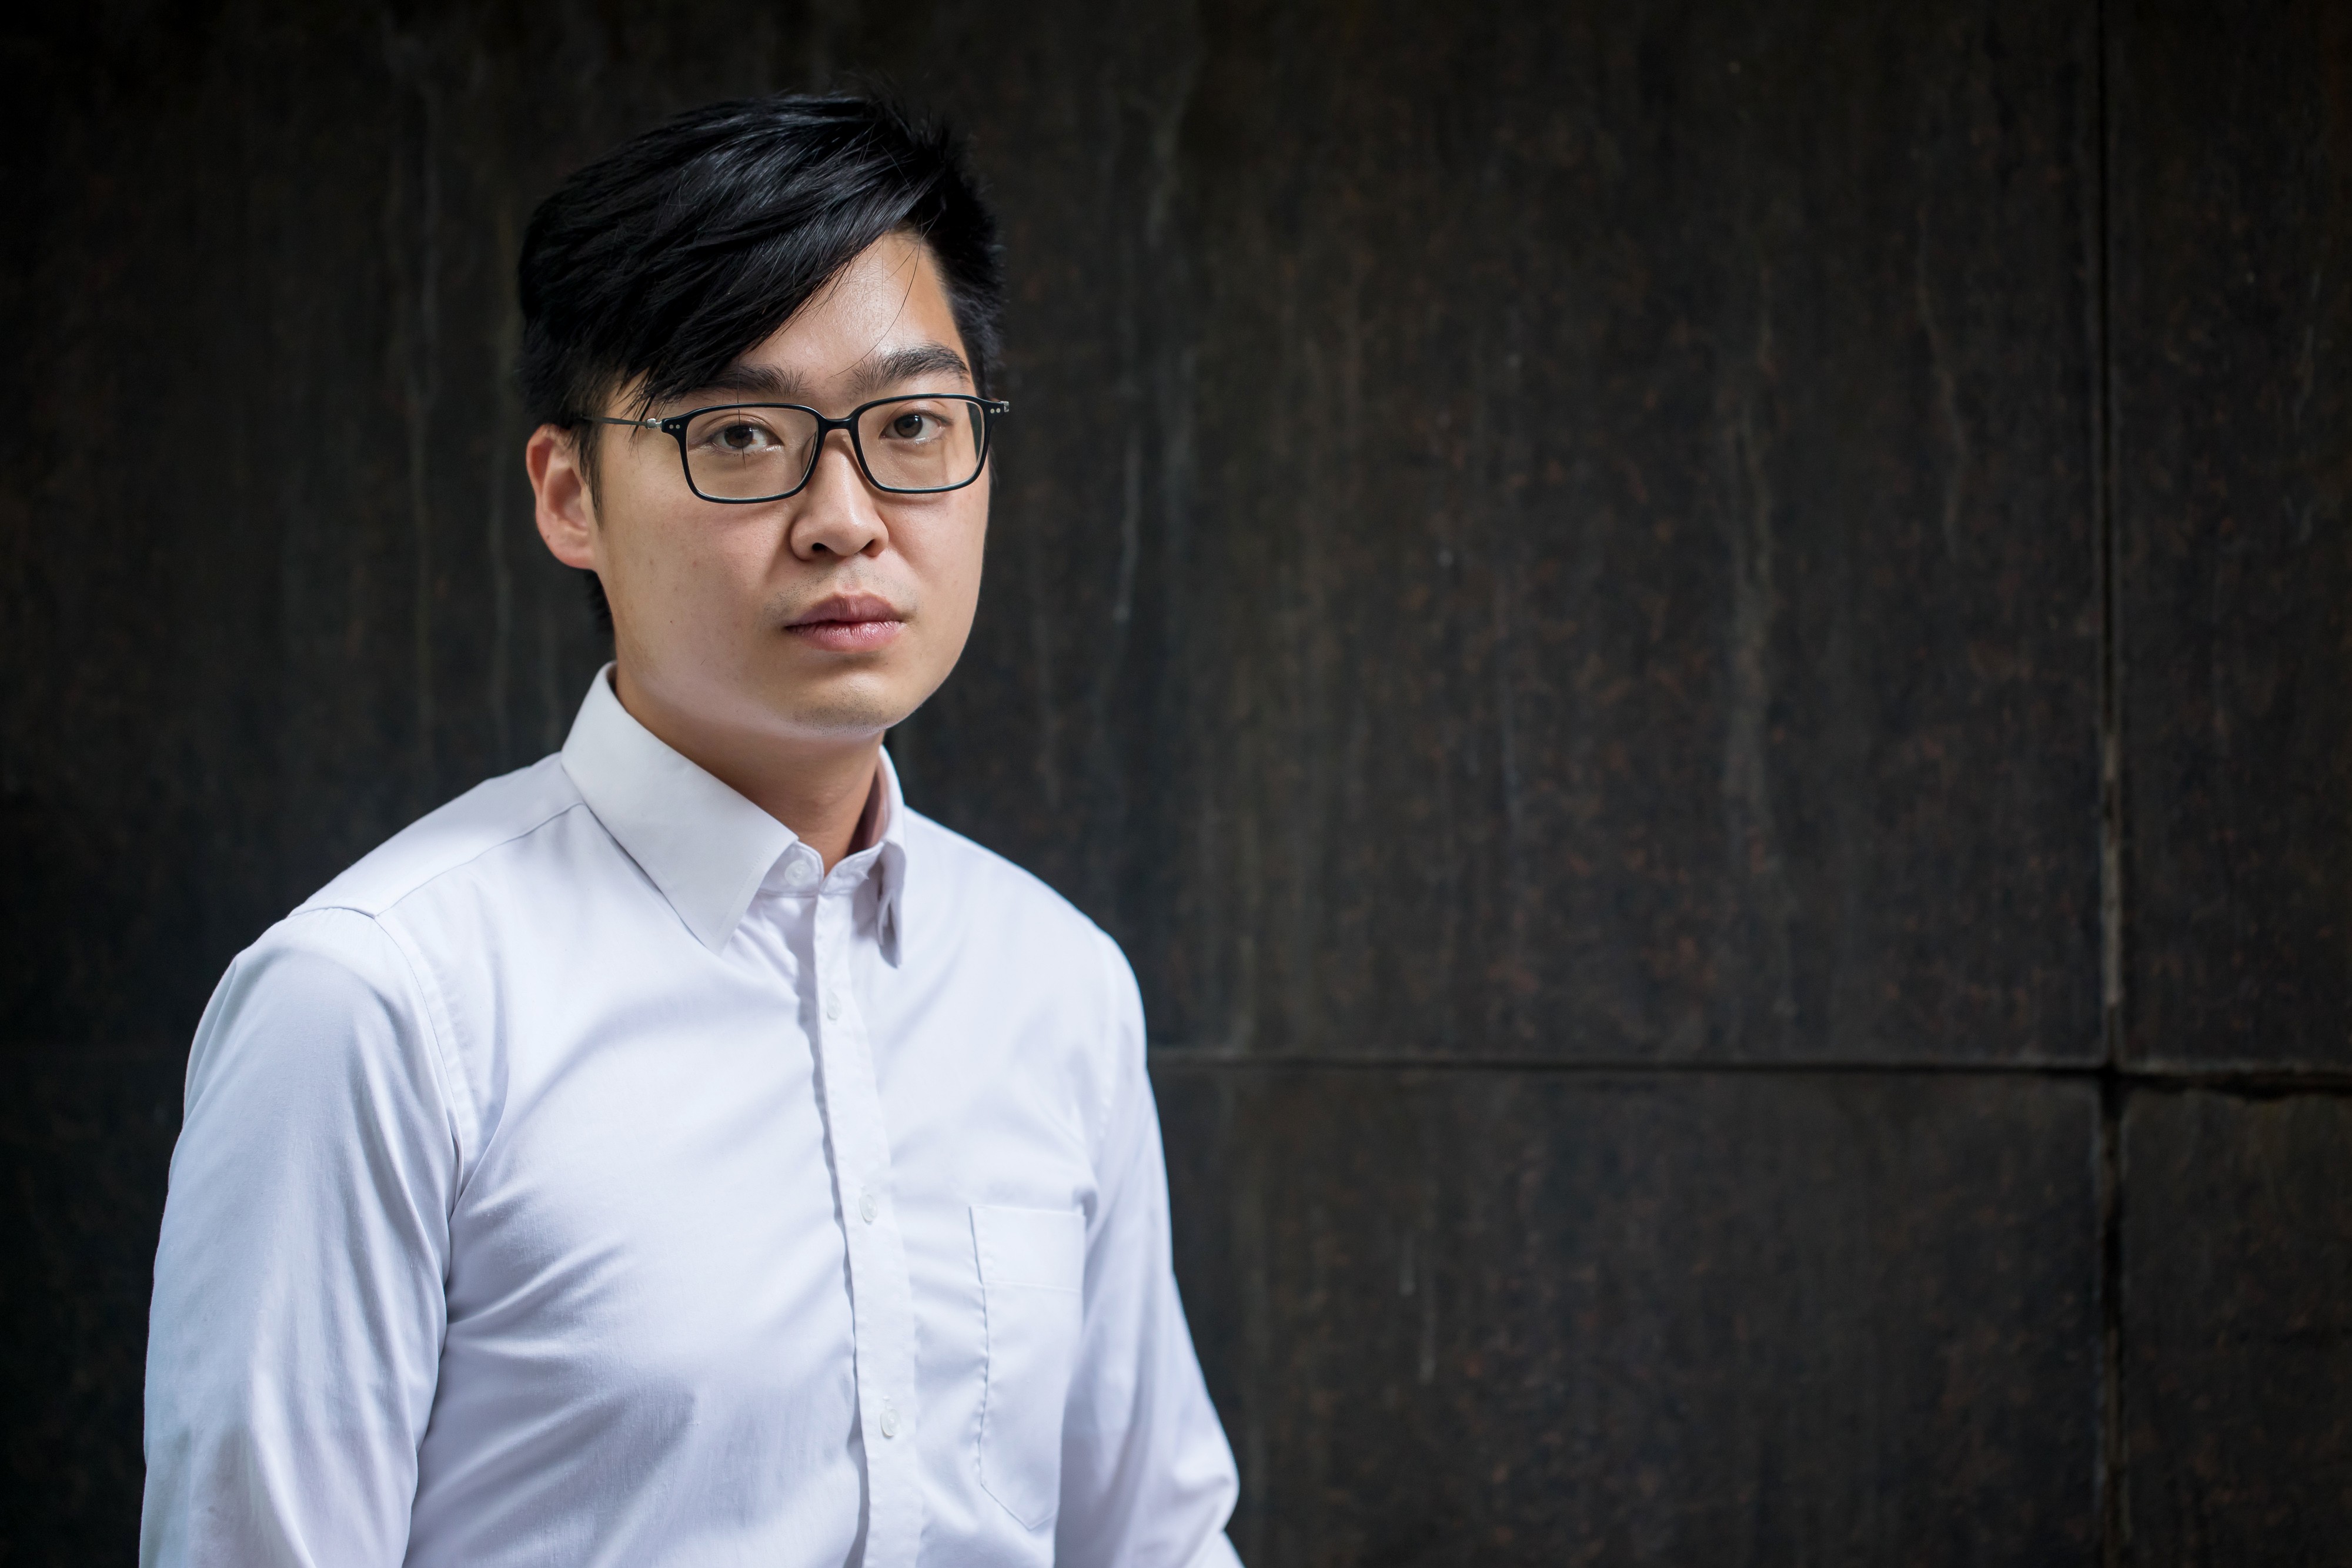 Andy Chan, convenor of the Hong Kong National Party, is scheduled to give a talk at the Foreign Correspondents’ Club on August 14. Photo: Bloomberg